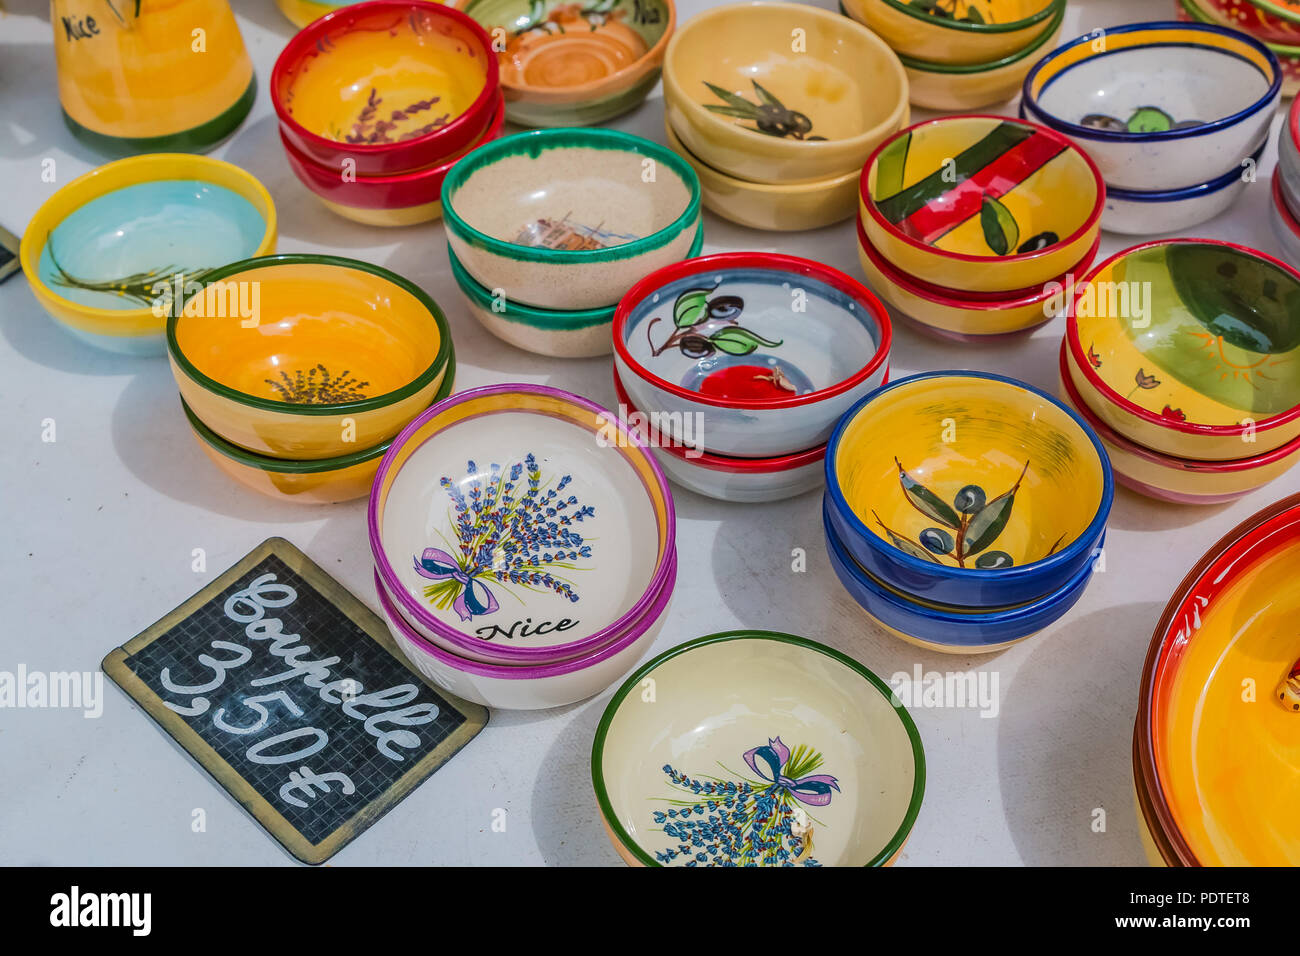 Colorful souvenir pottery dishes made of ceramics at a market stall at the Cours Saleya, famous market in Nice, that is known for hand made gifts, flo Stock Photo